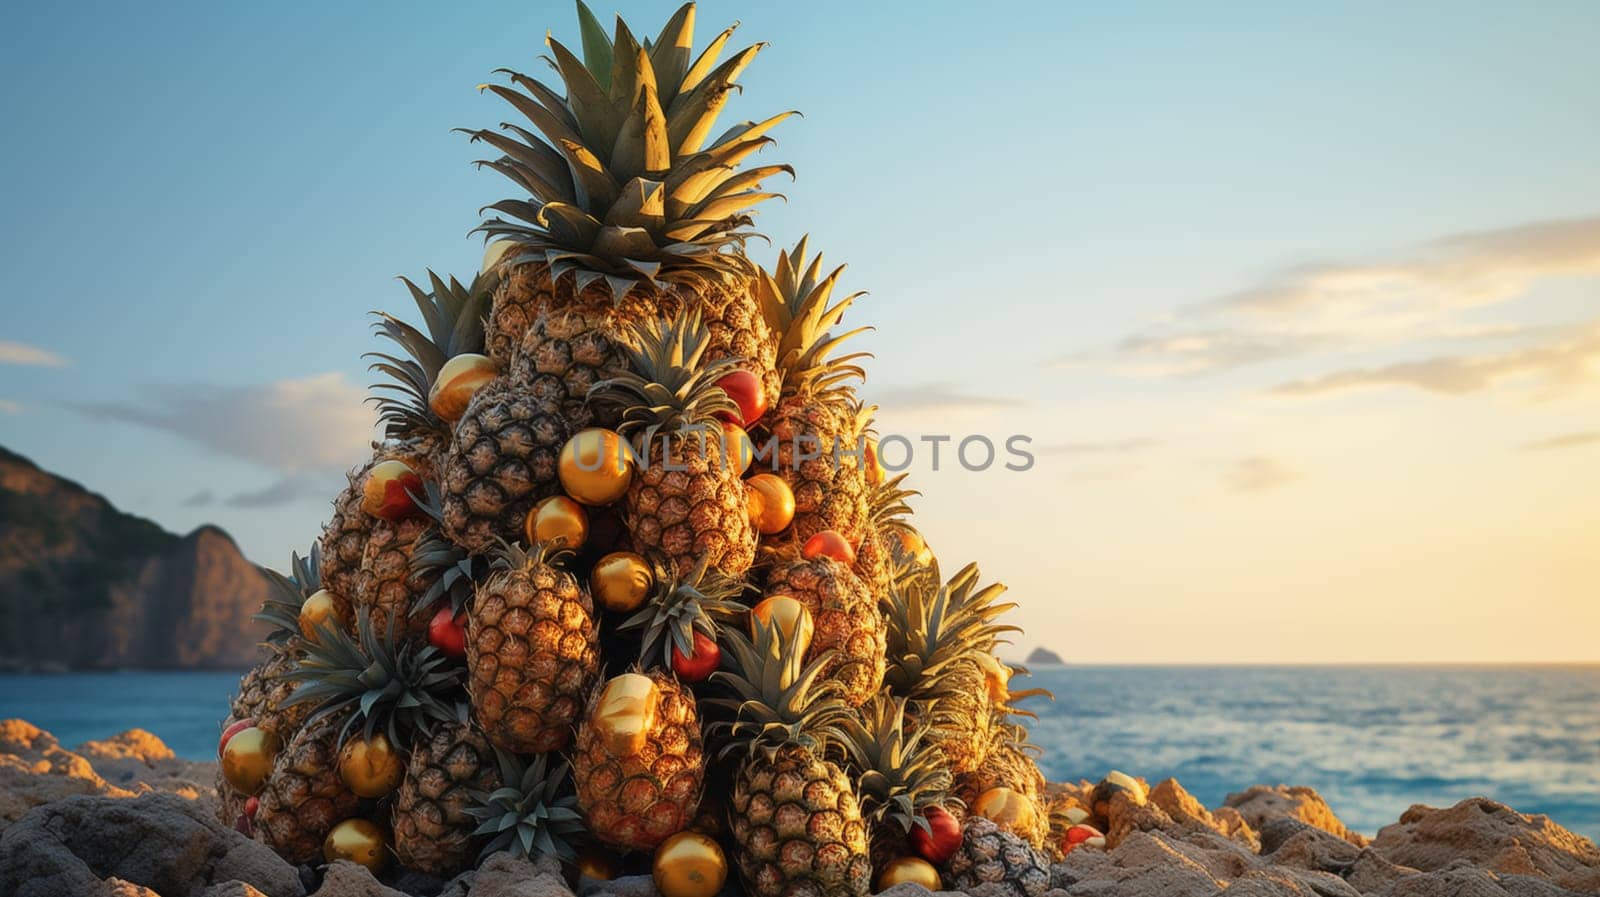 Pyramid of pineapples with golden balls standing on the sand on the beach by Zakharova